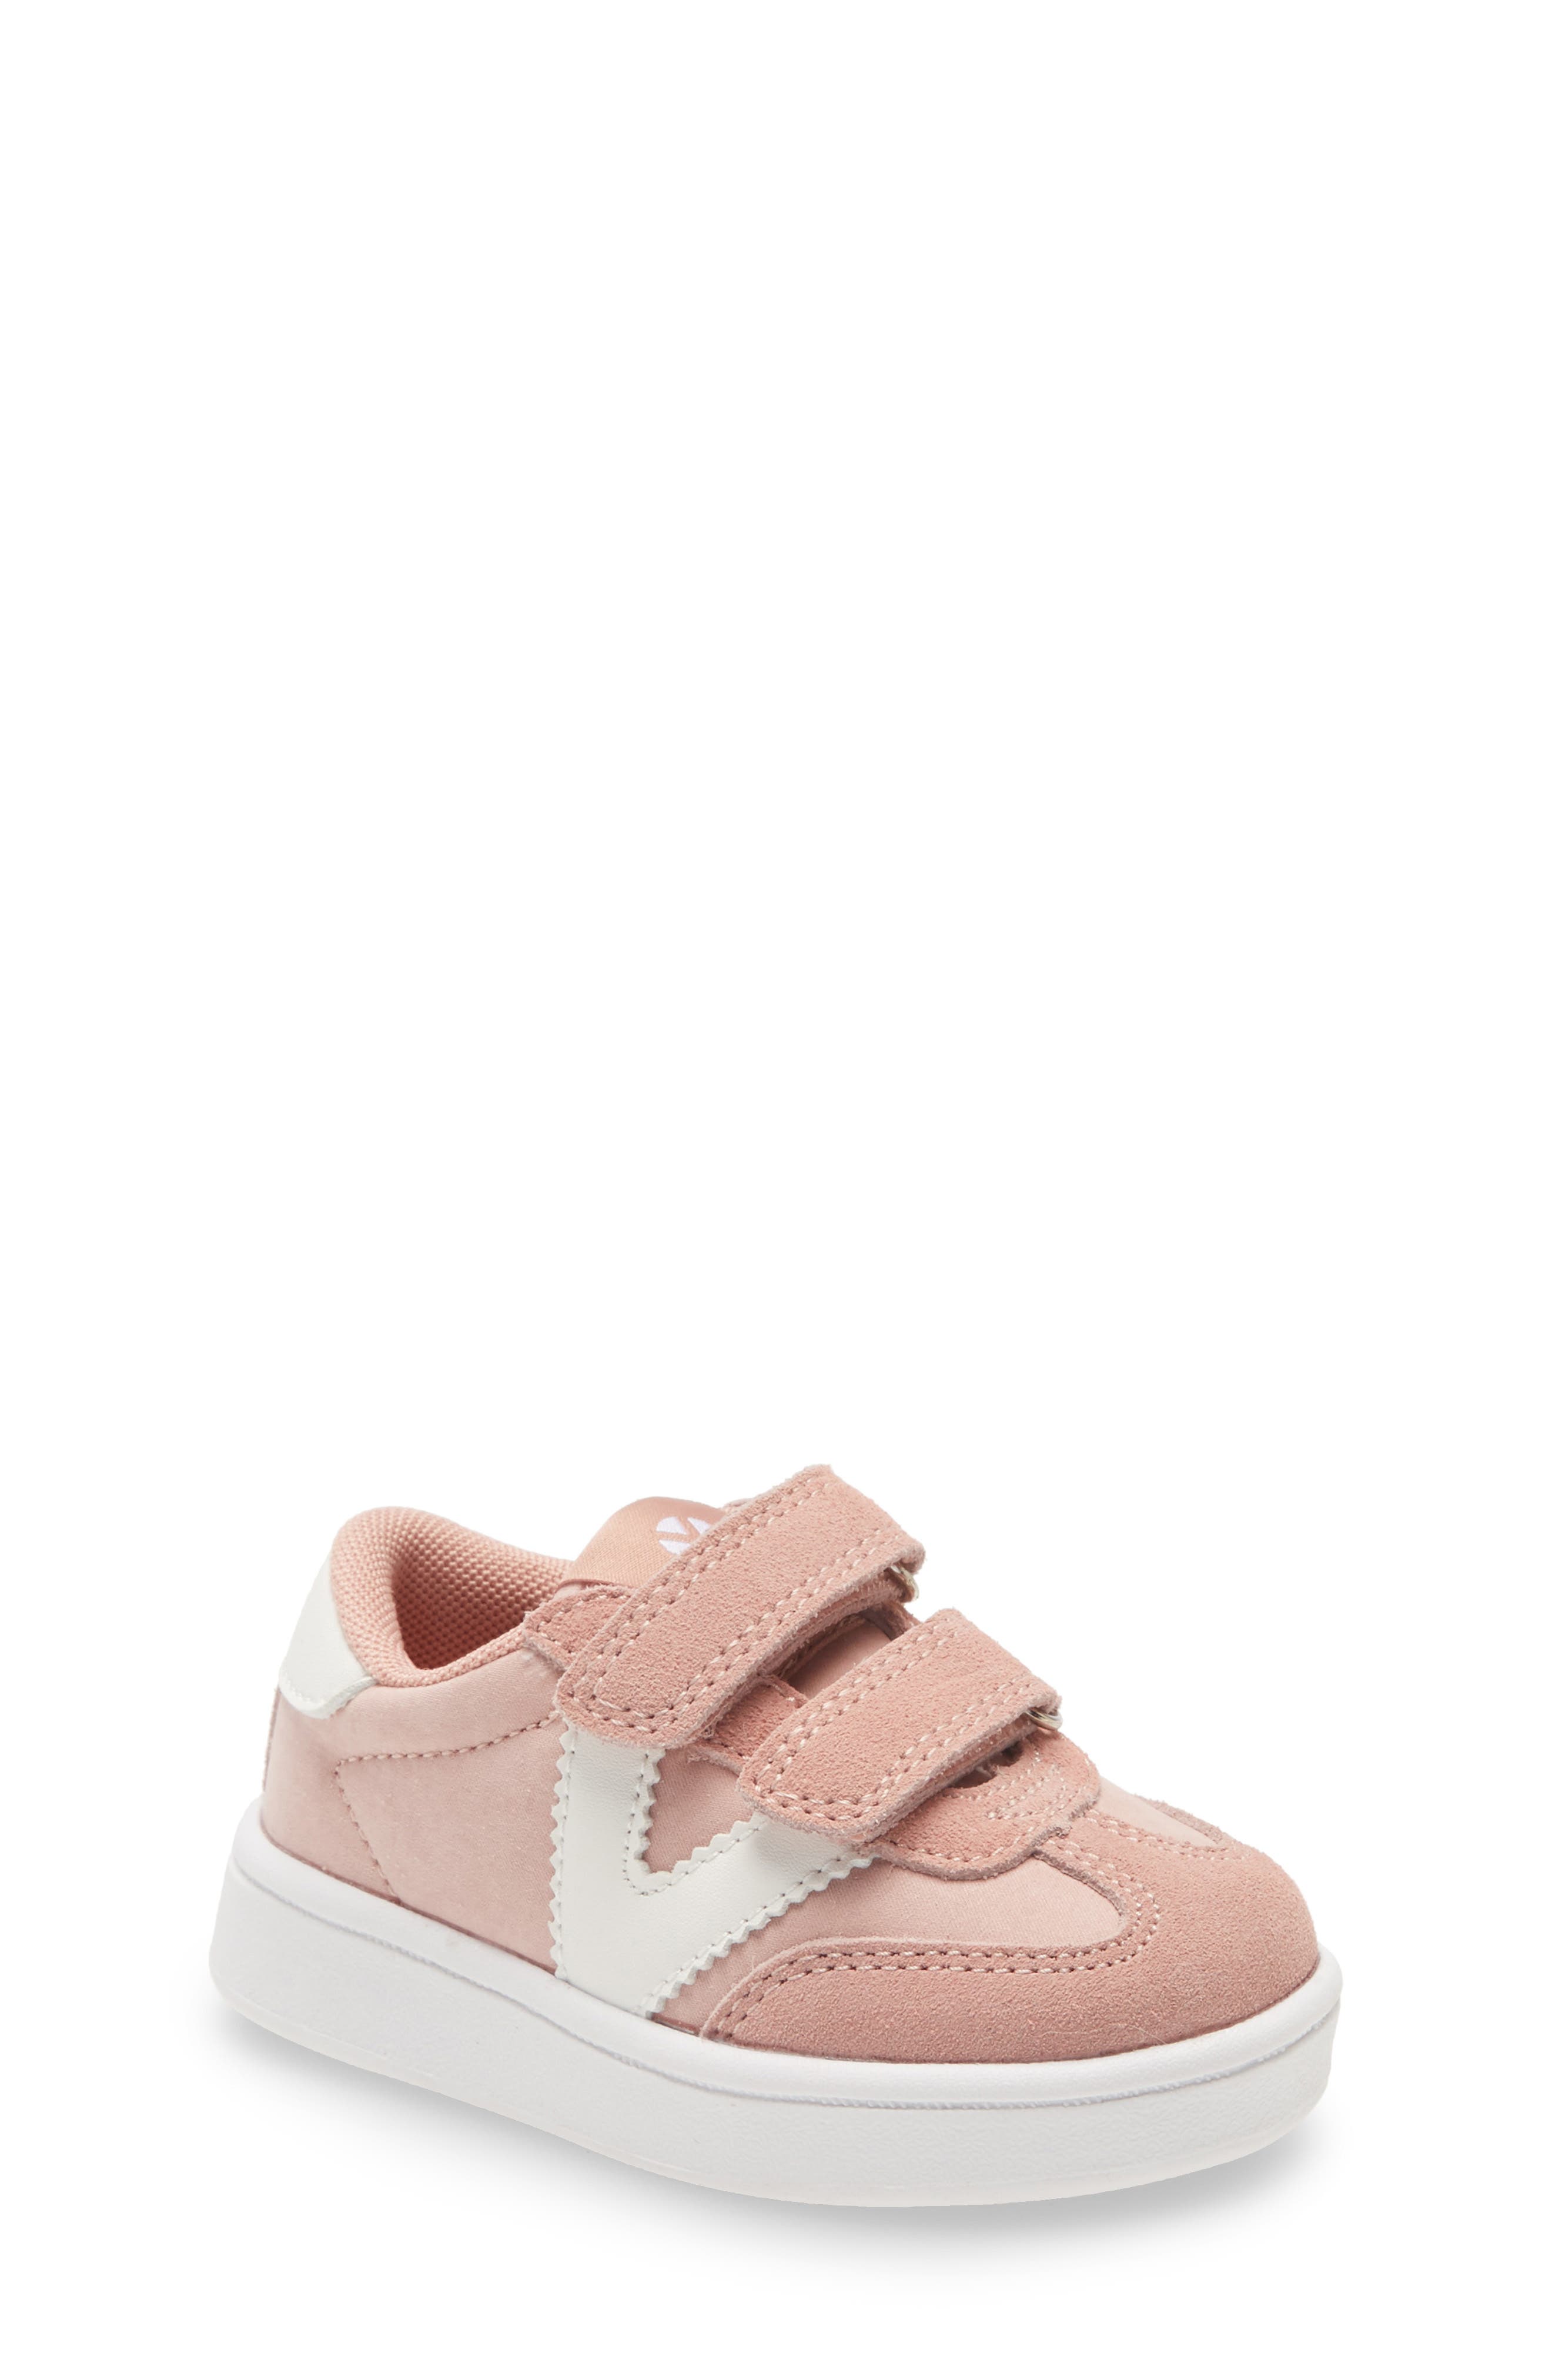 Baby Victoria Shoes Sneakers \u0026 Athletic 